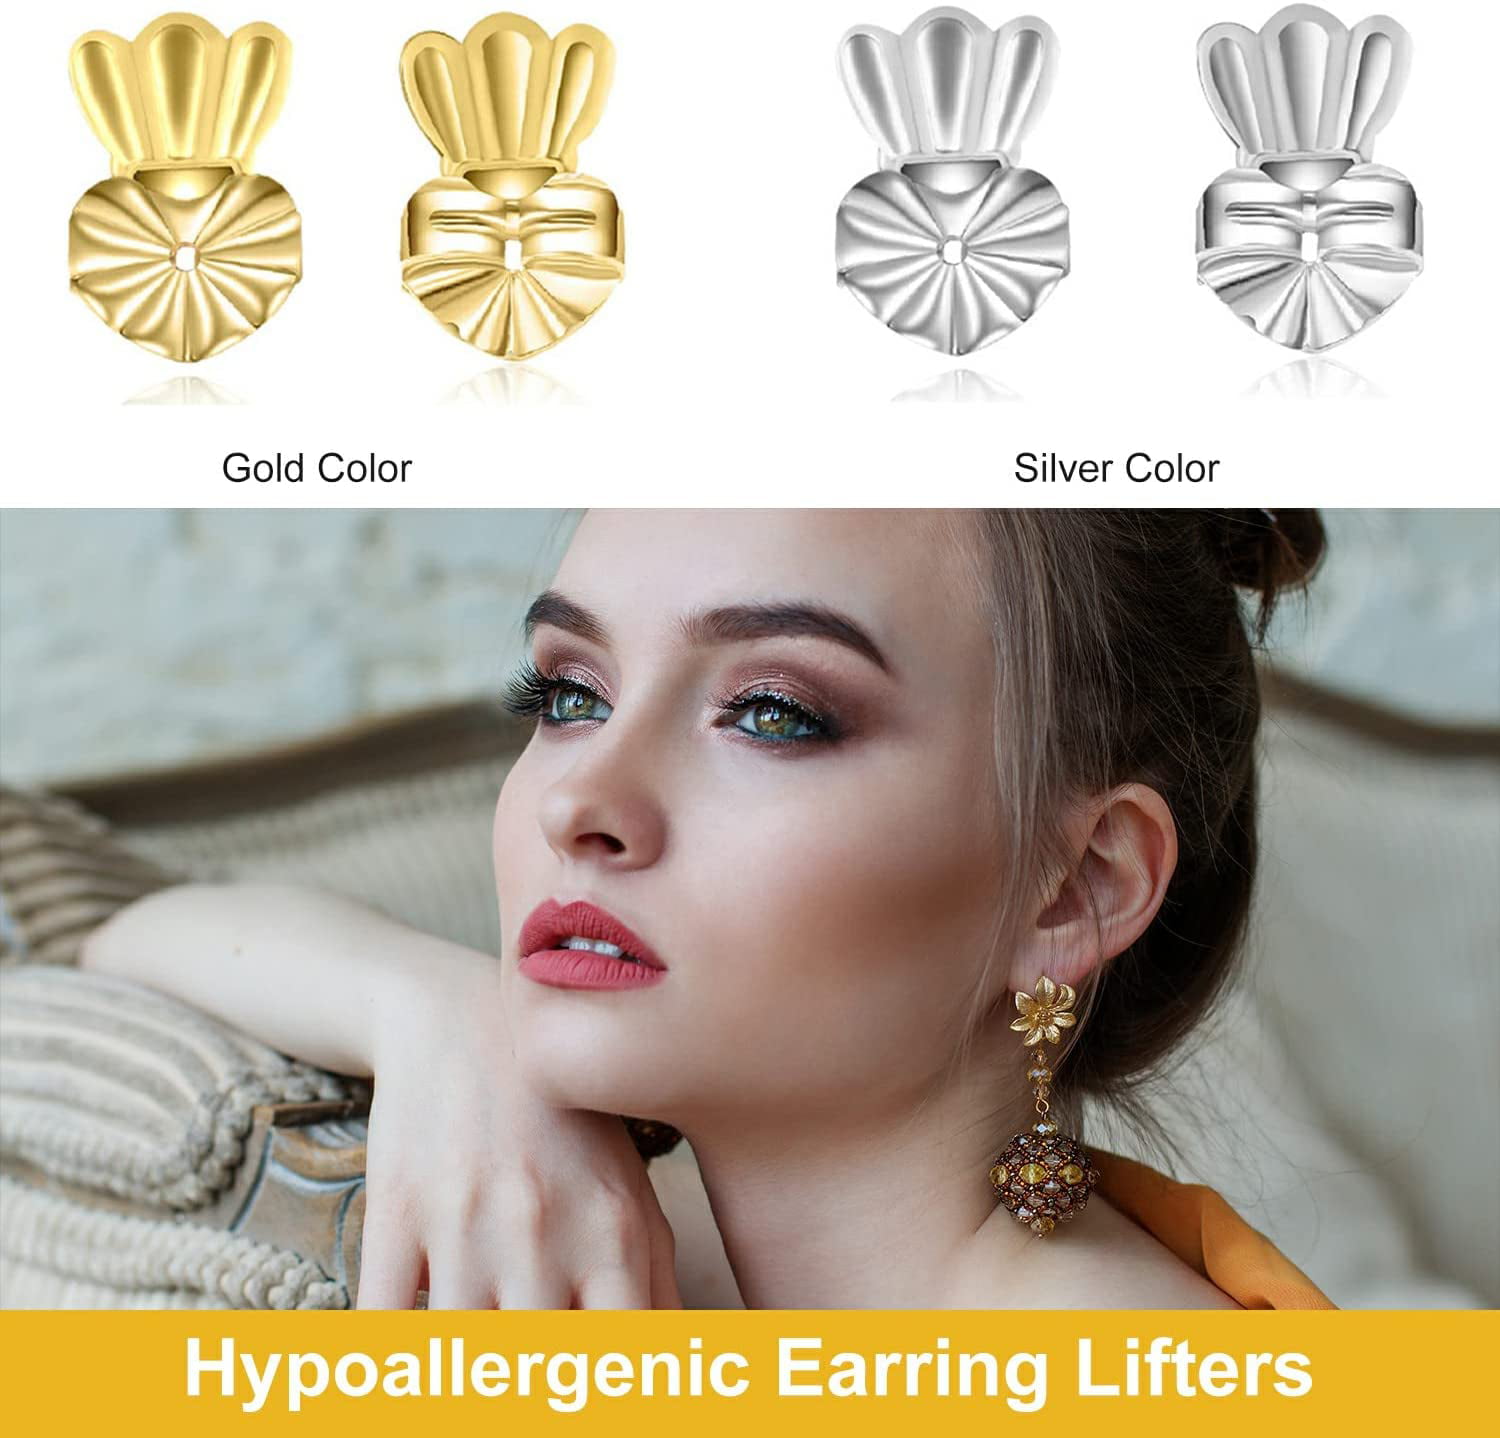 3 Pairs Earring Lifters,hypoallergenic Earring Backs For Droopy Ears,adjustable  Crown Ea